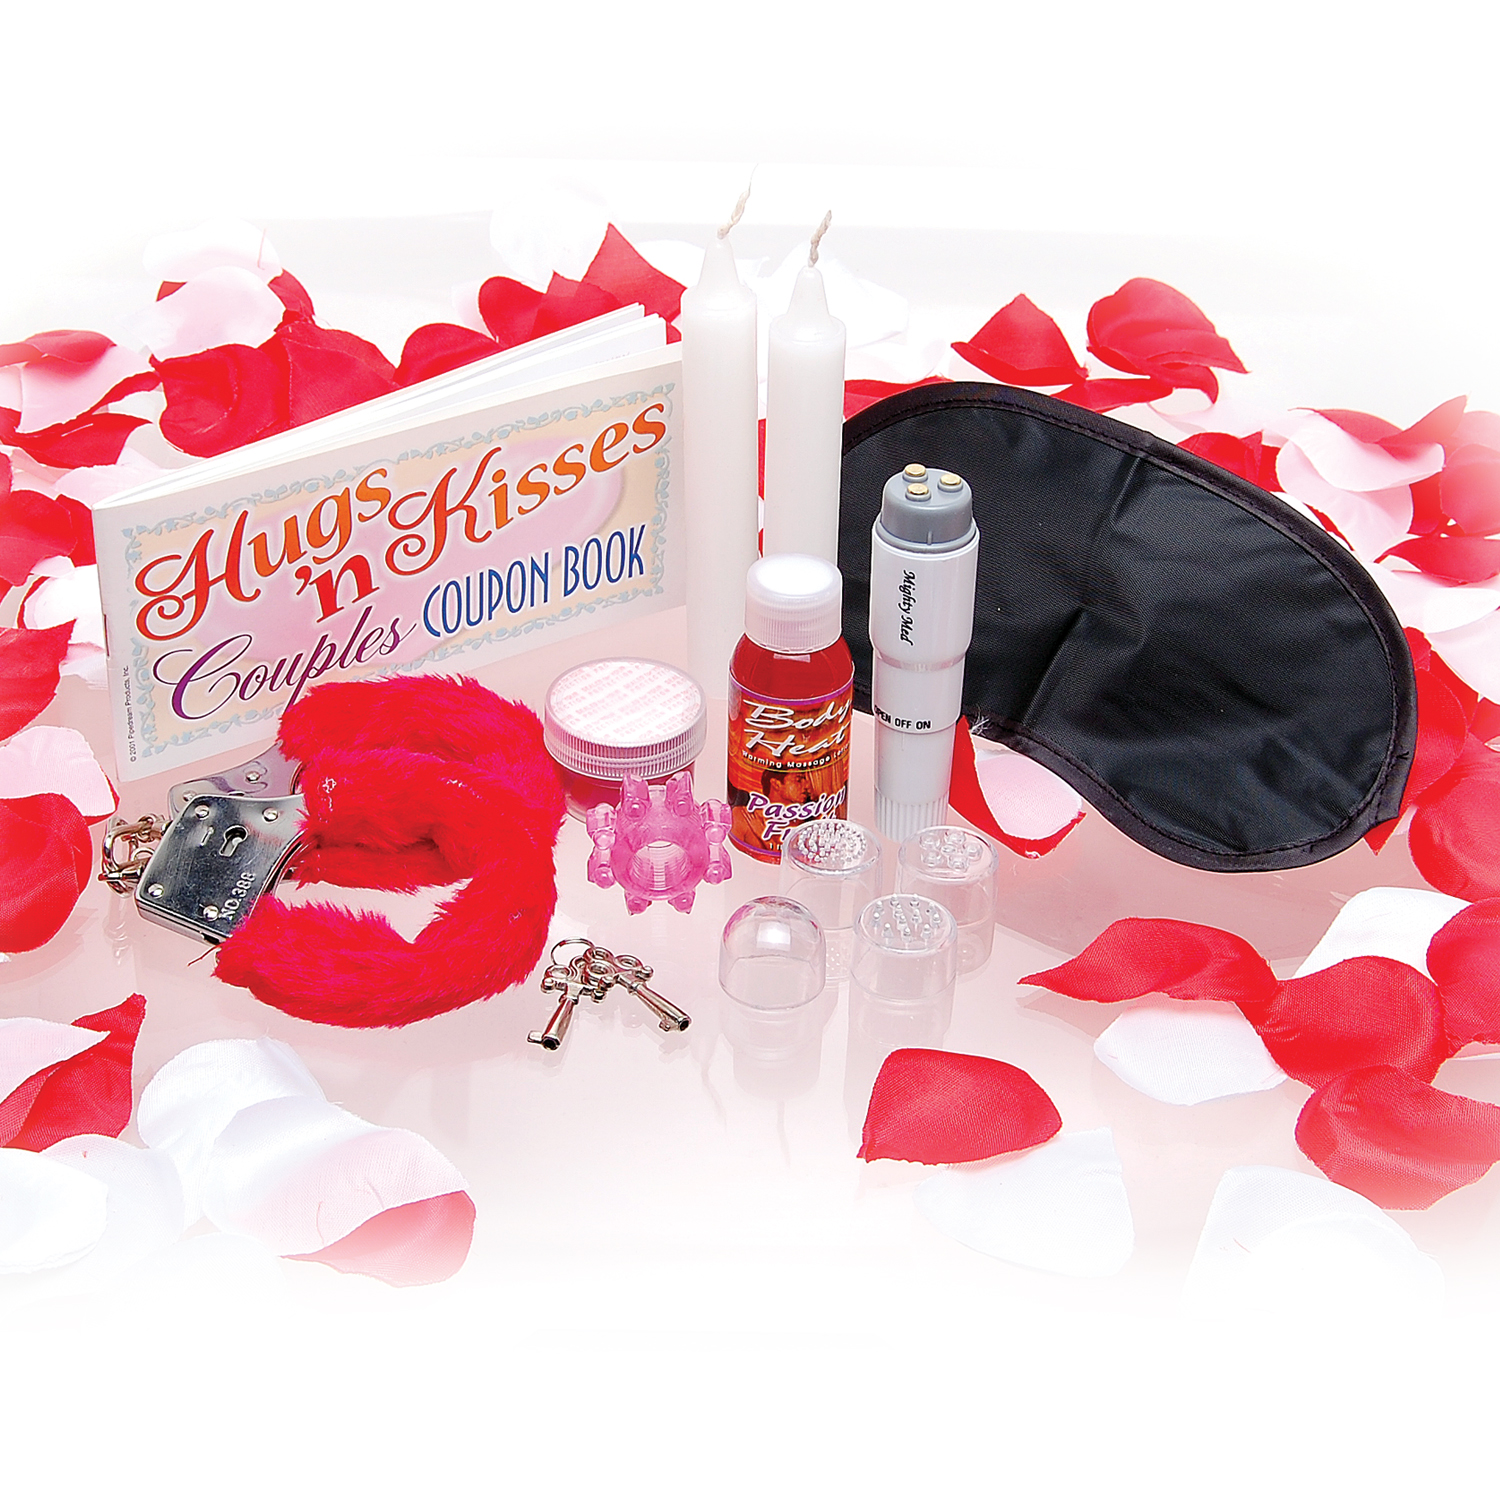 SEX THERAPY KIT FOR LOVERS  - PD209600